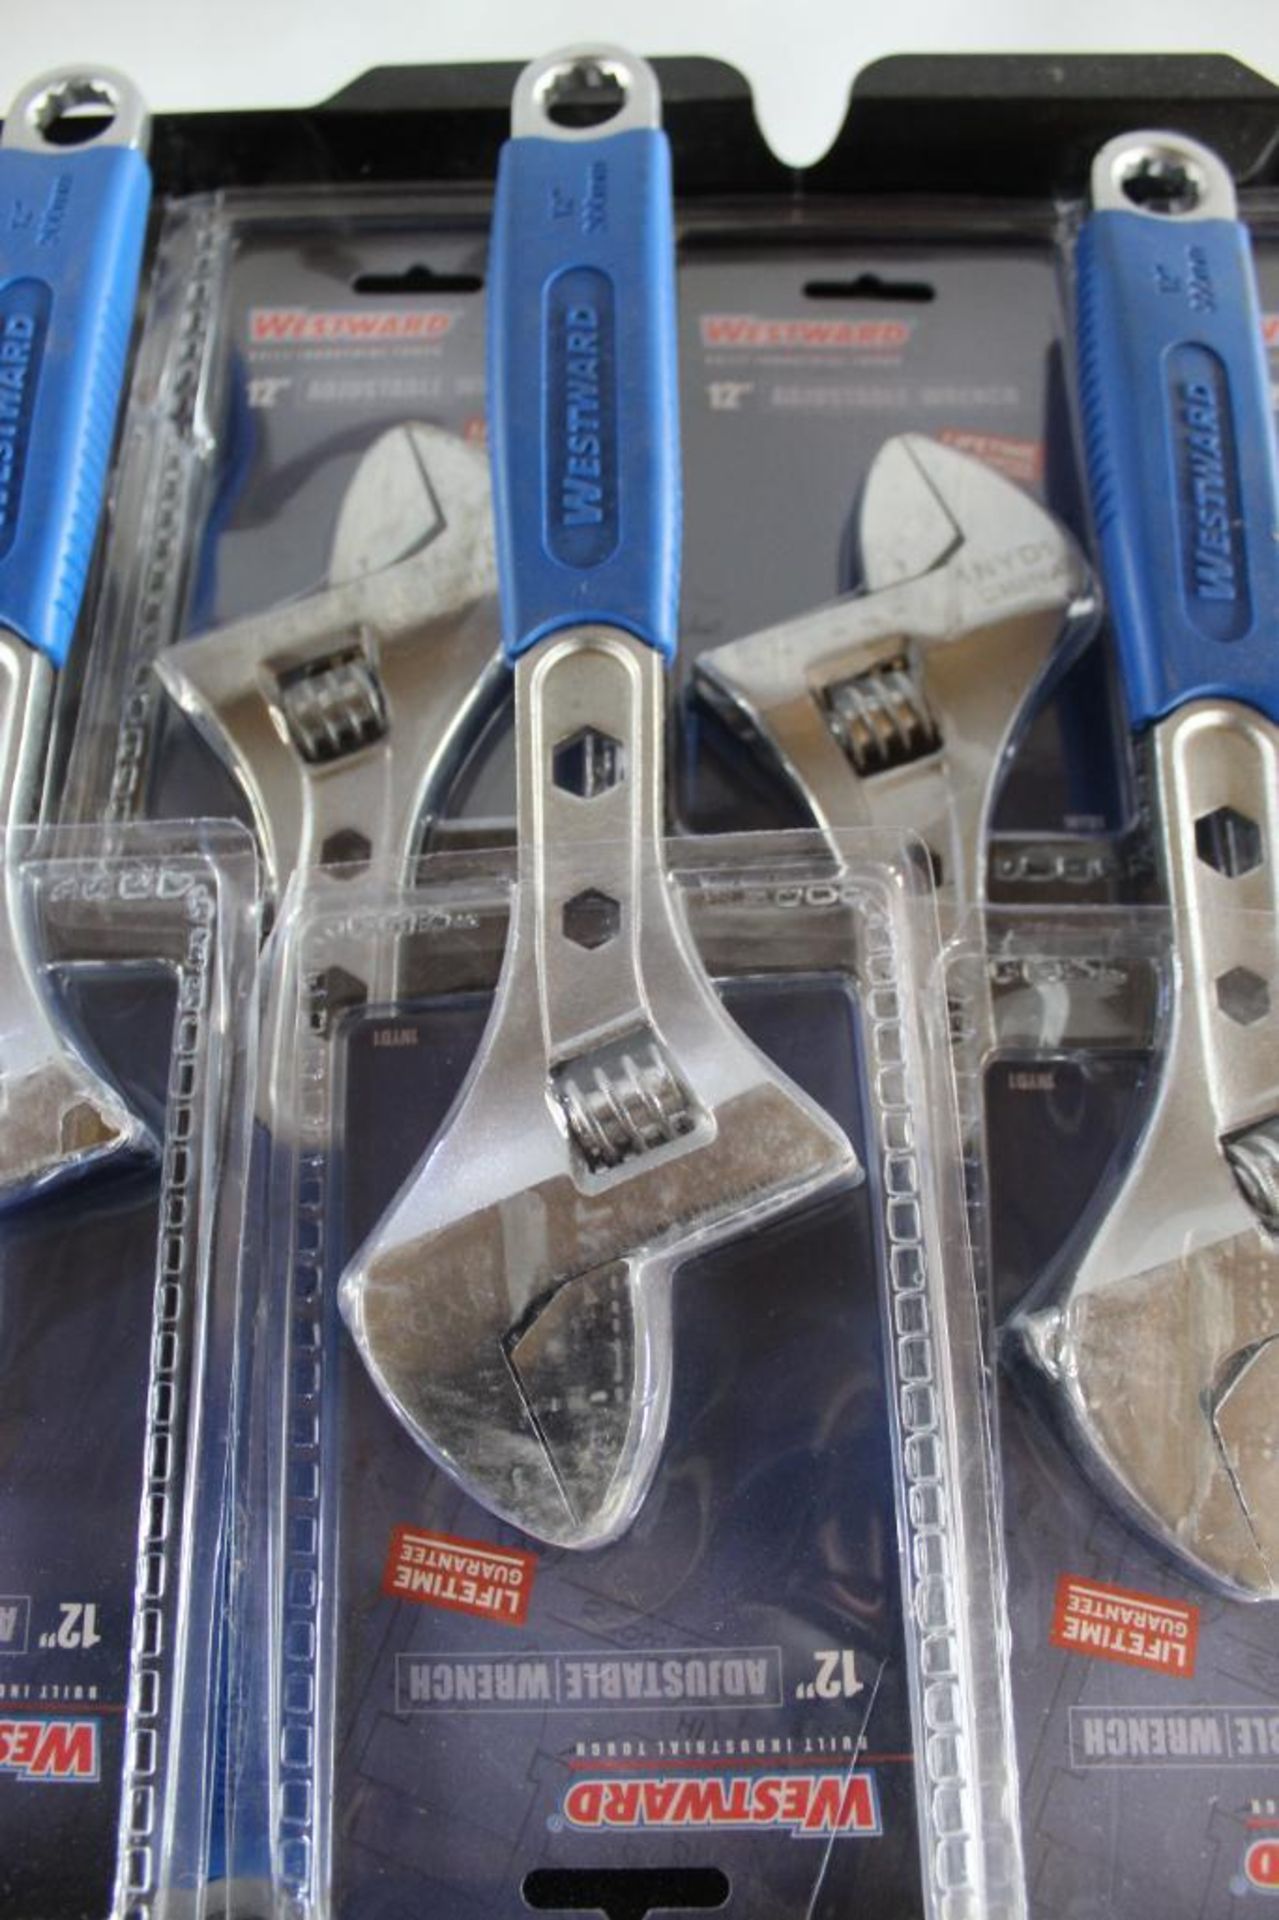 Lot of (8) Westward 12" Adjustable Wrench - Image 3 of 3